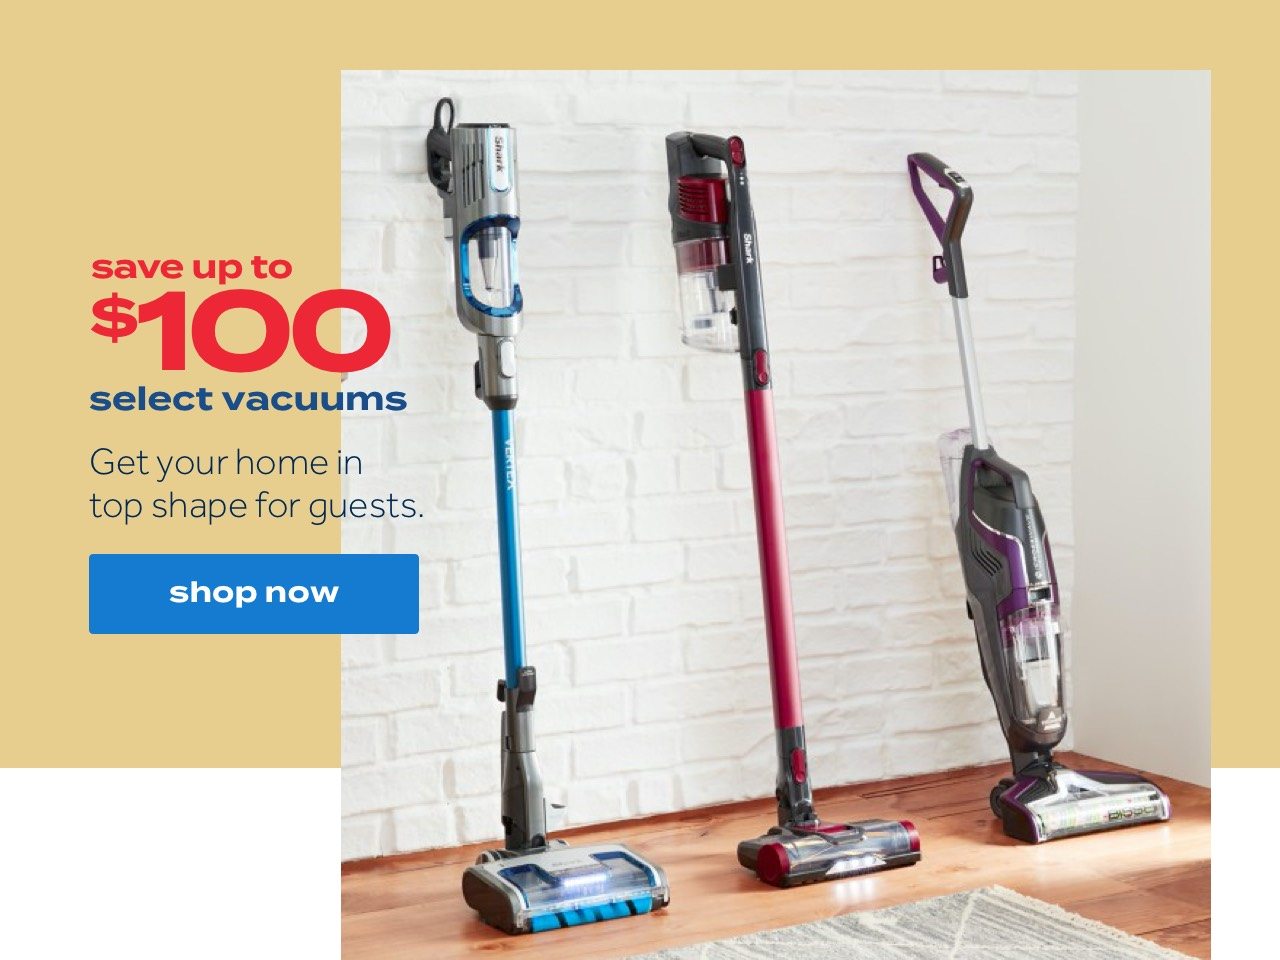 save up to $100 select vacuums| Get your home in top shape for guests